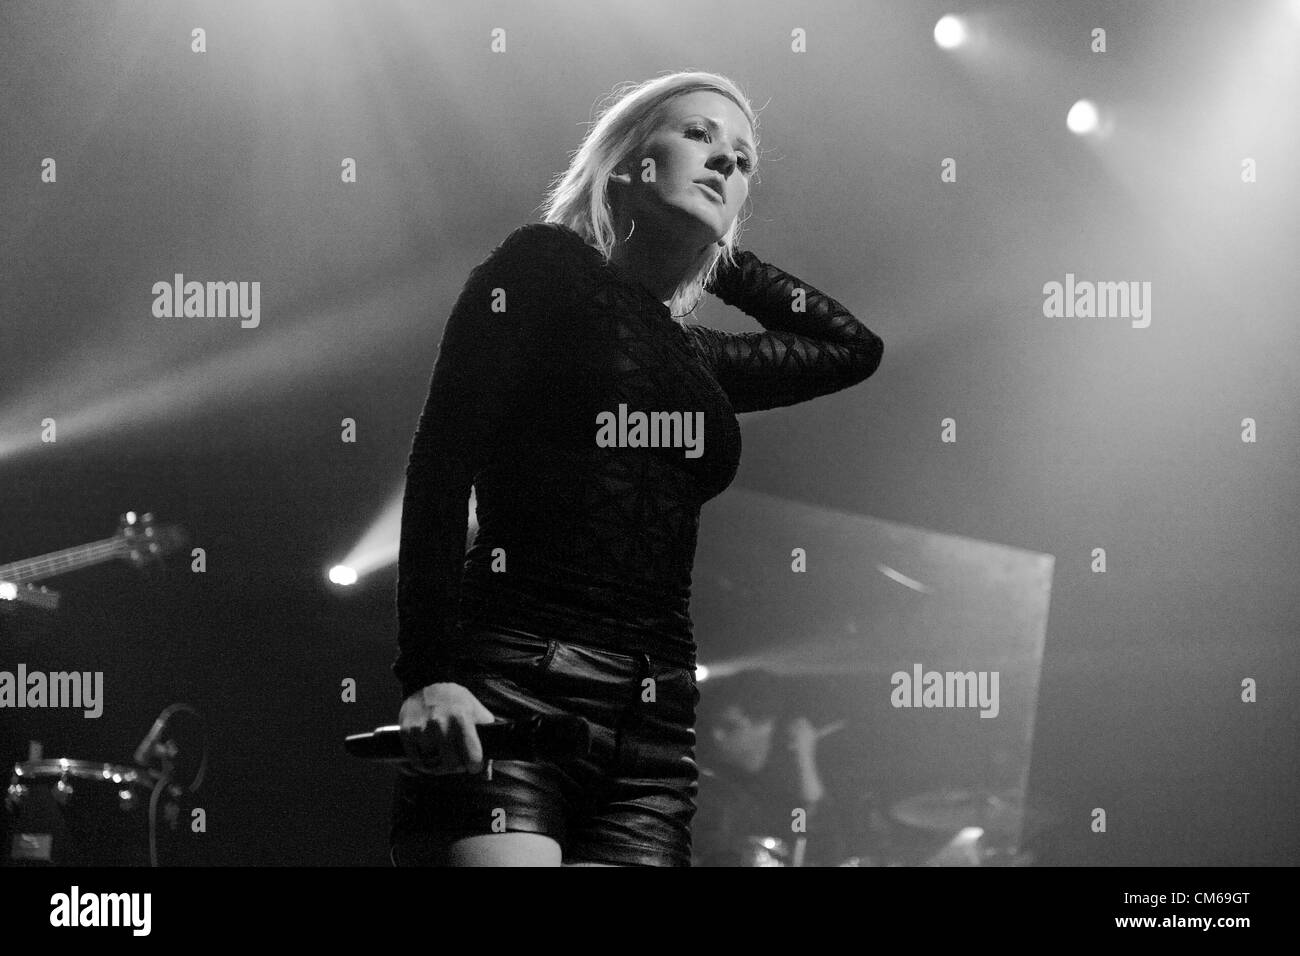 October 14, 2012. Toronto, Canada. English singer and songwriter Ellie Goulding performs at The Sound Academy in Toronto during her Halcyon Tour in supporting her second studio album Halcyon. Stock Photo